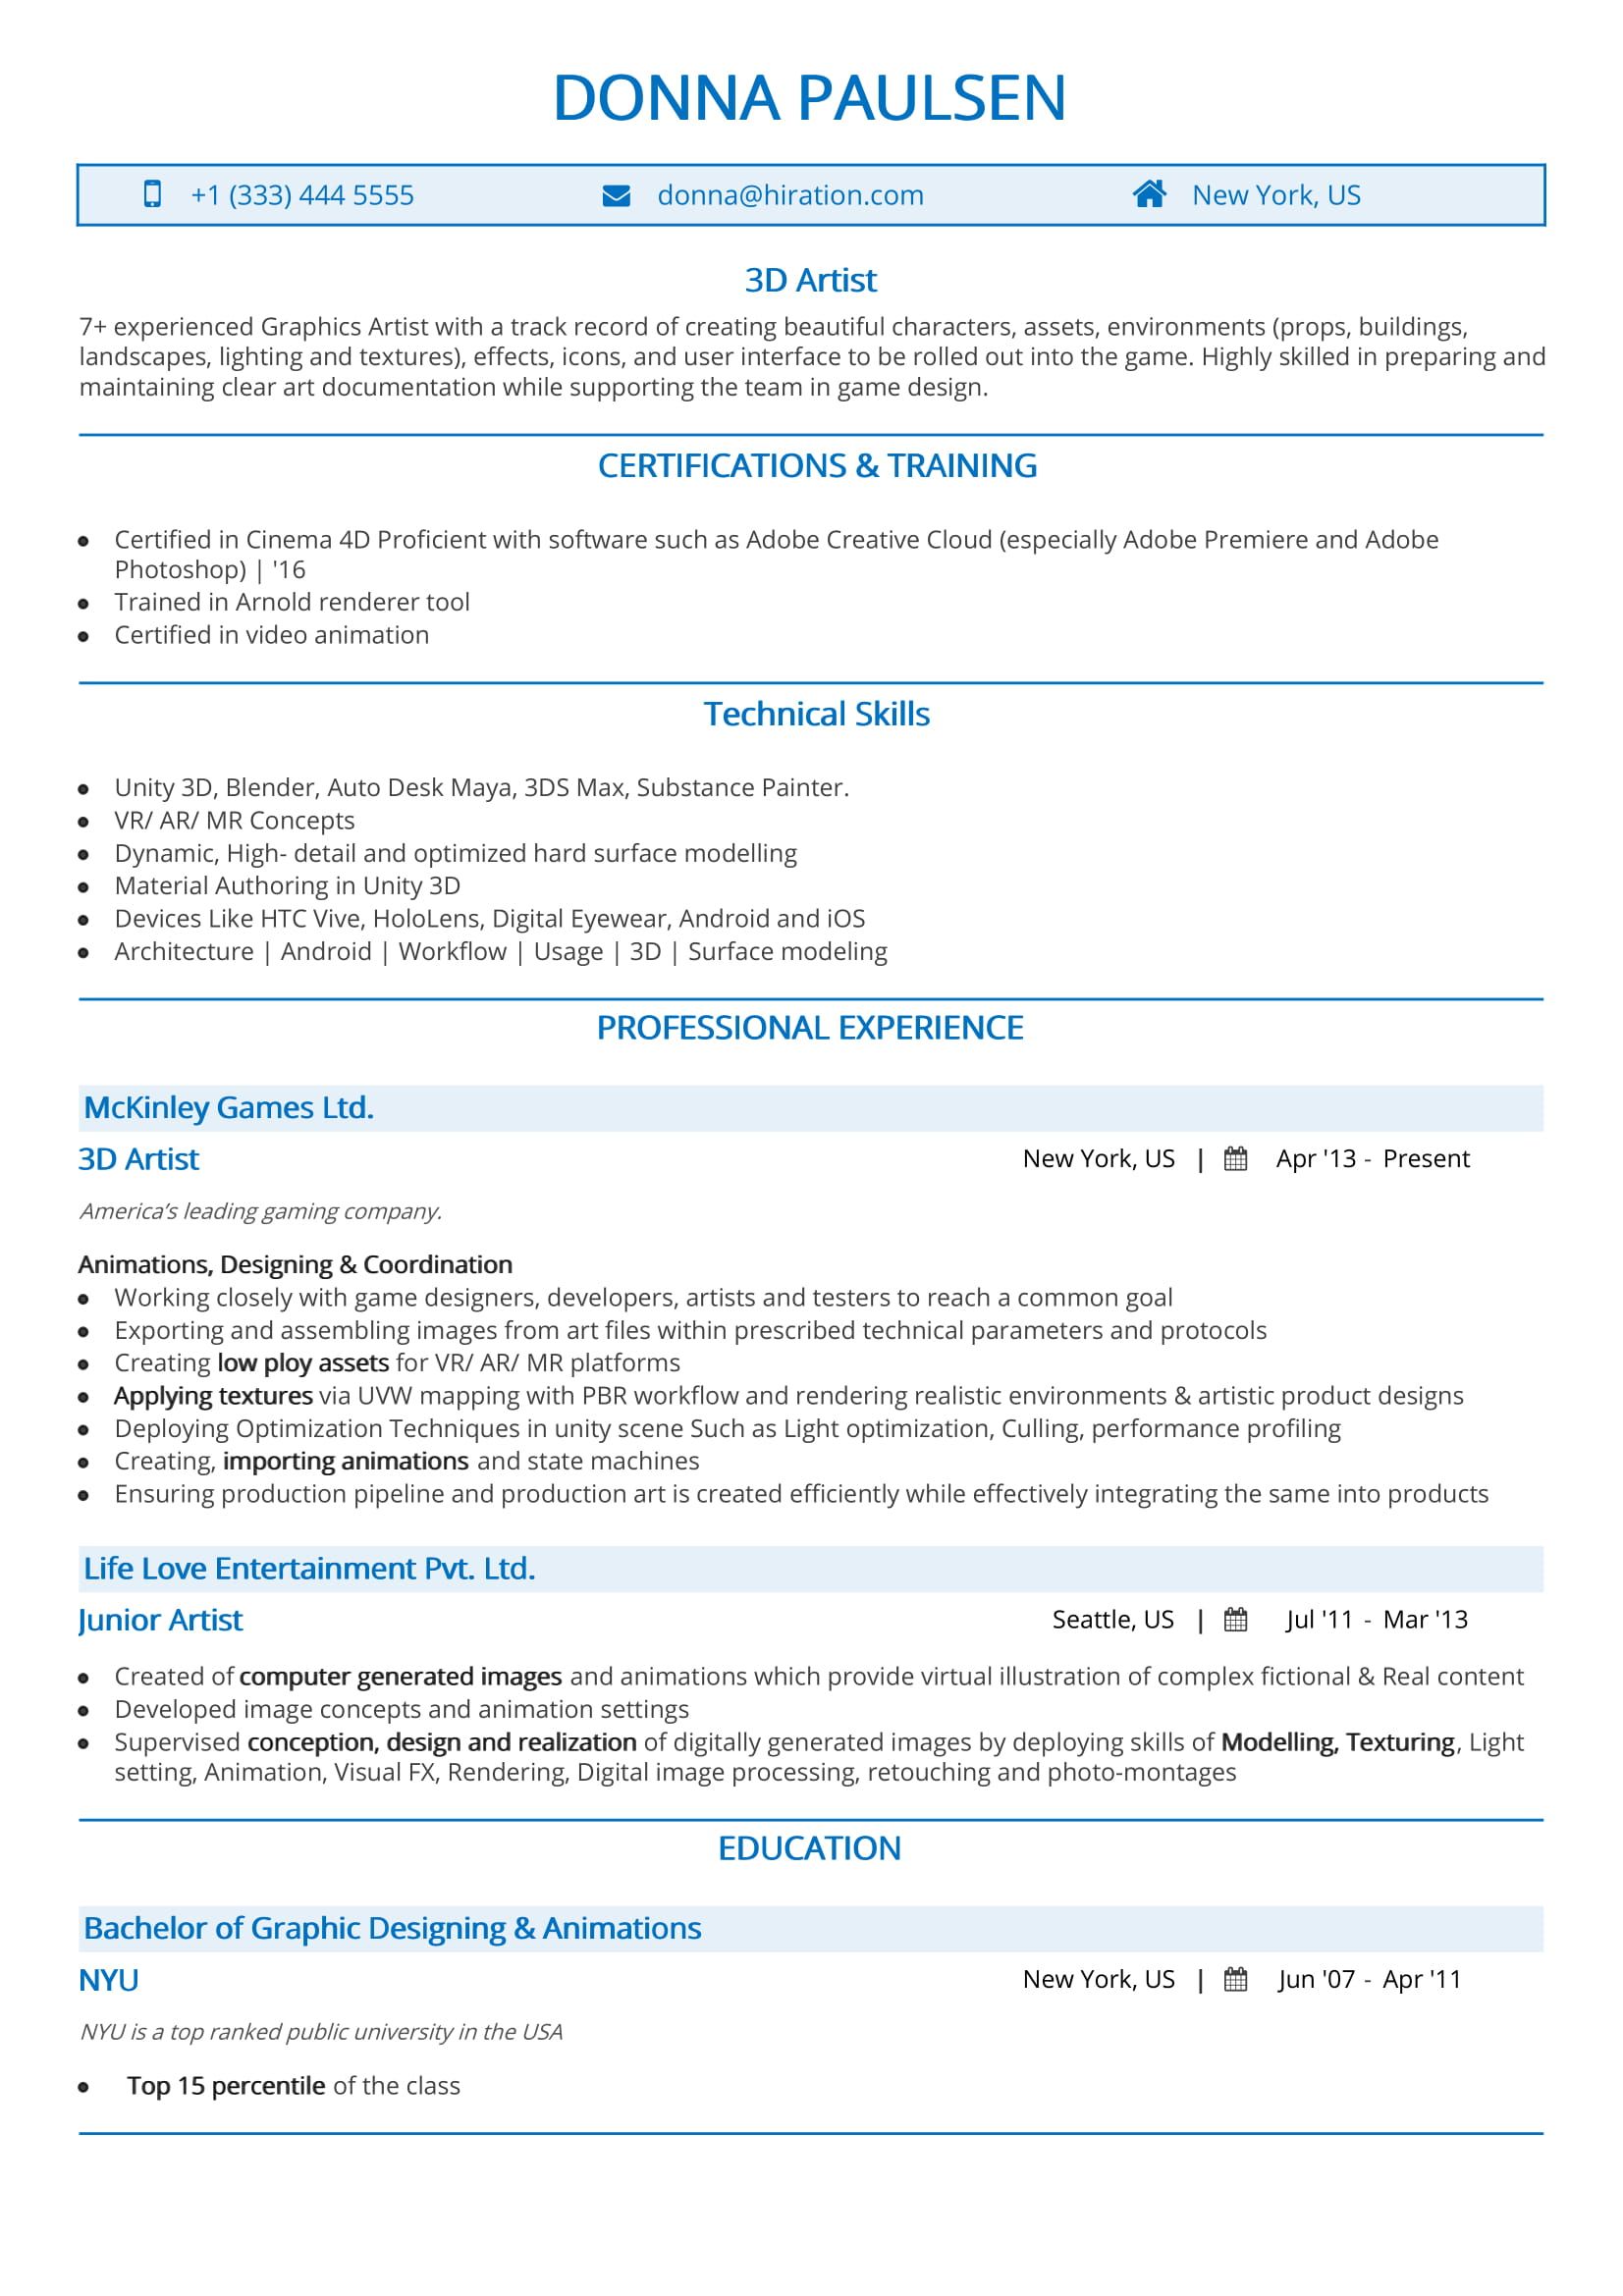 Creating A Resume Content Template Artist Resume 1 creating a resume|wikiresume.com